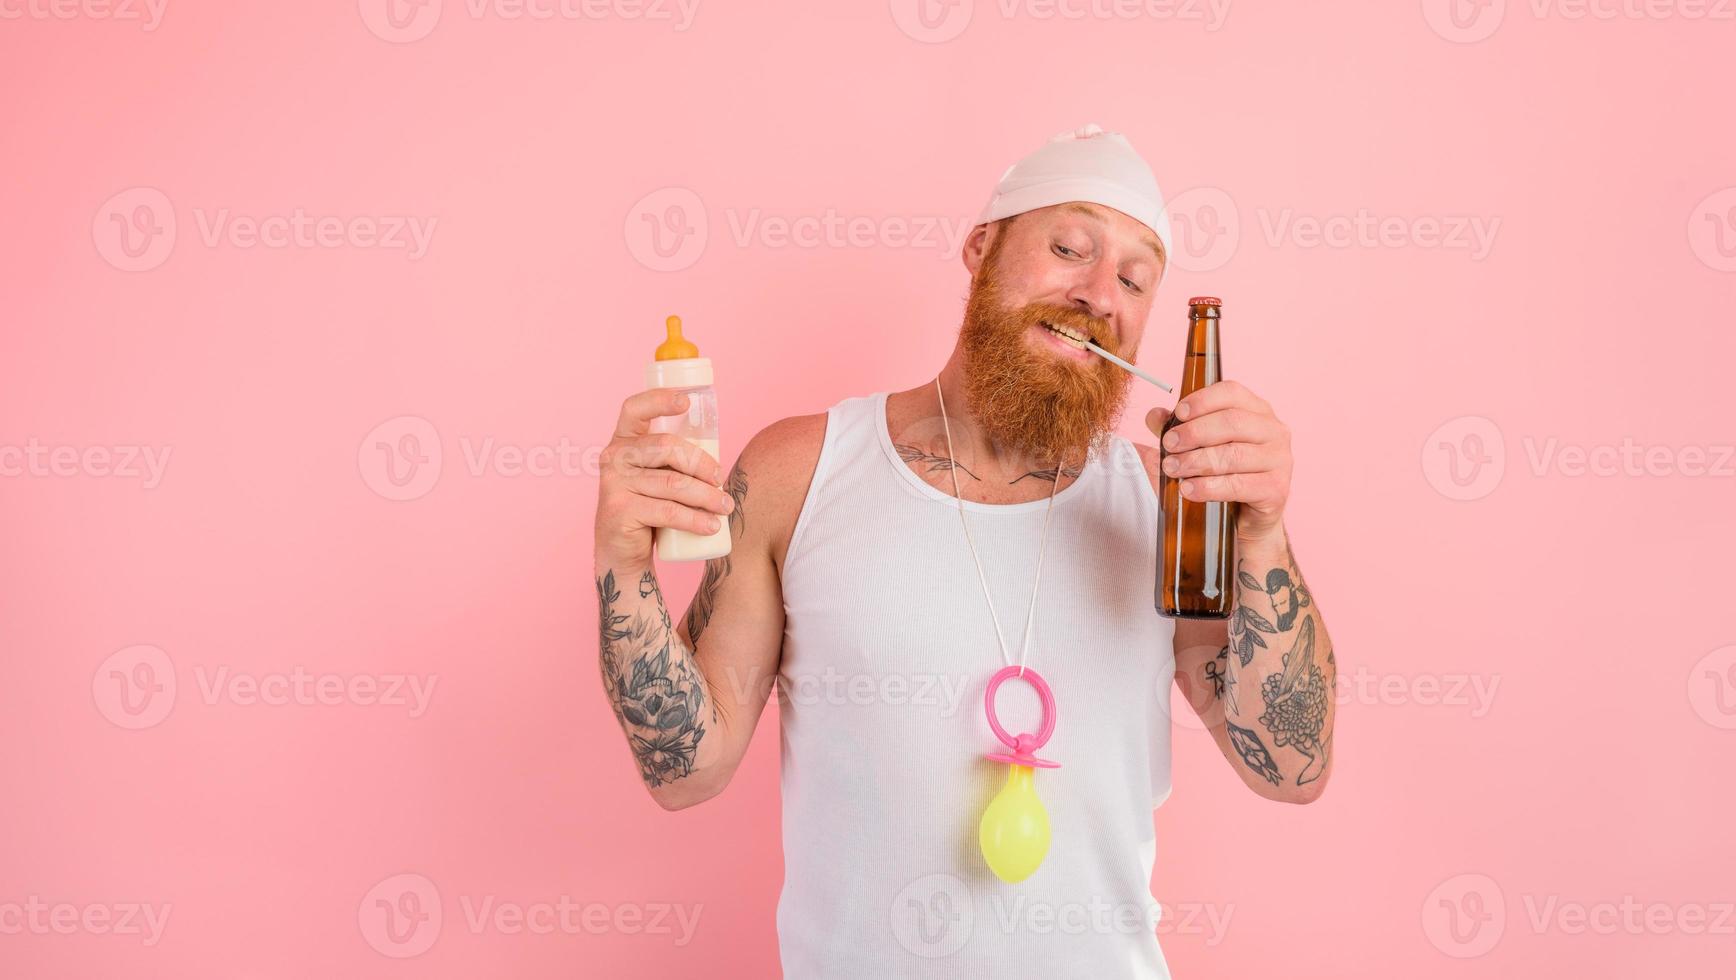 Thoughtful man with beard and tattoos acts like a newborn but wants a beer photo